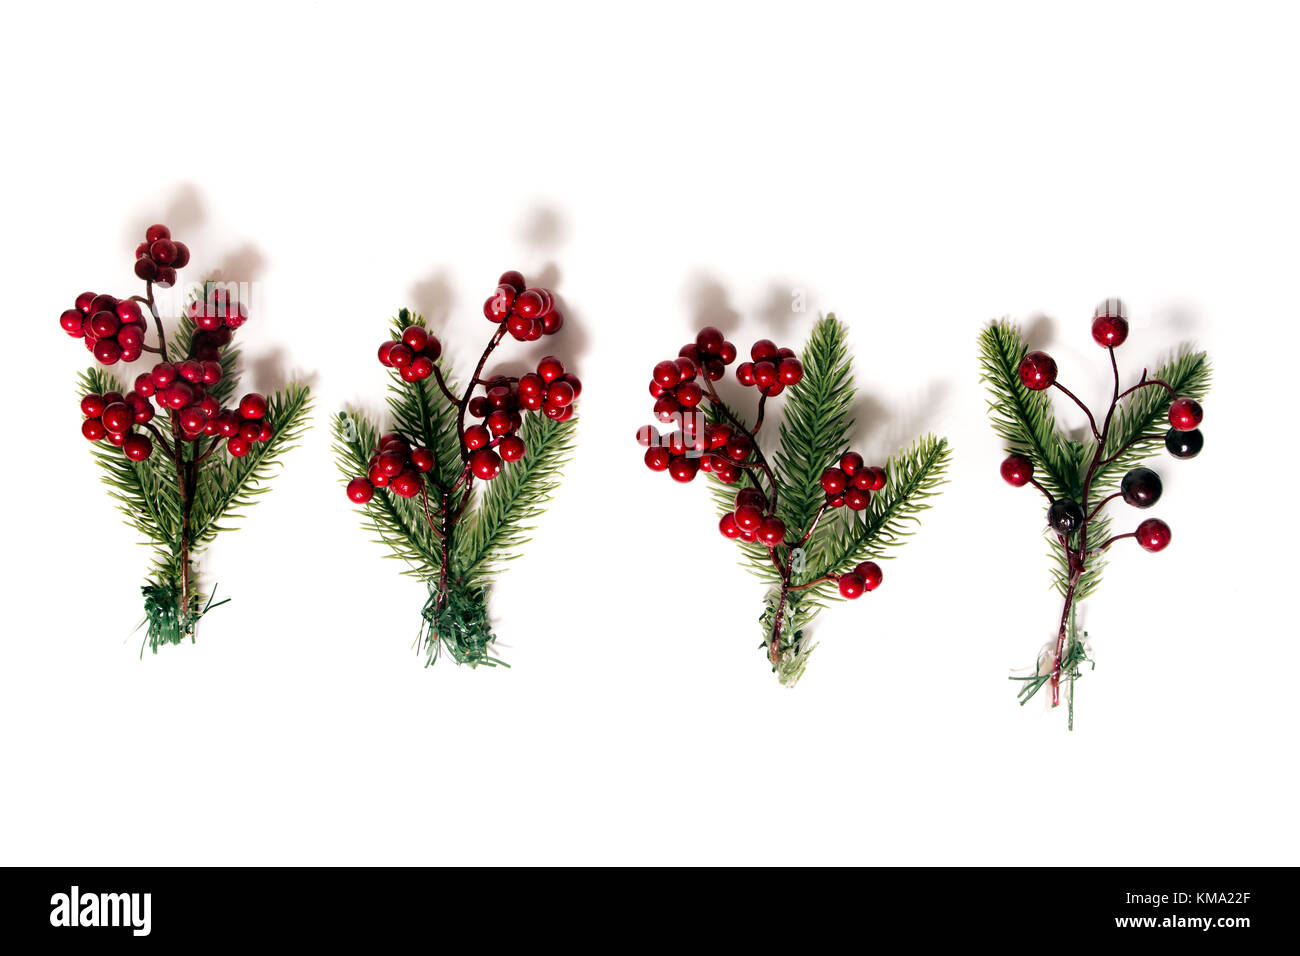 Different Christmas berry branches isolated on a white background. Stock Photo